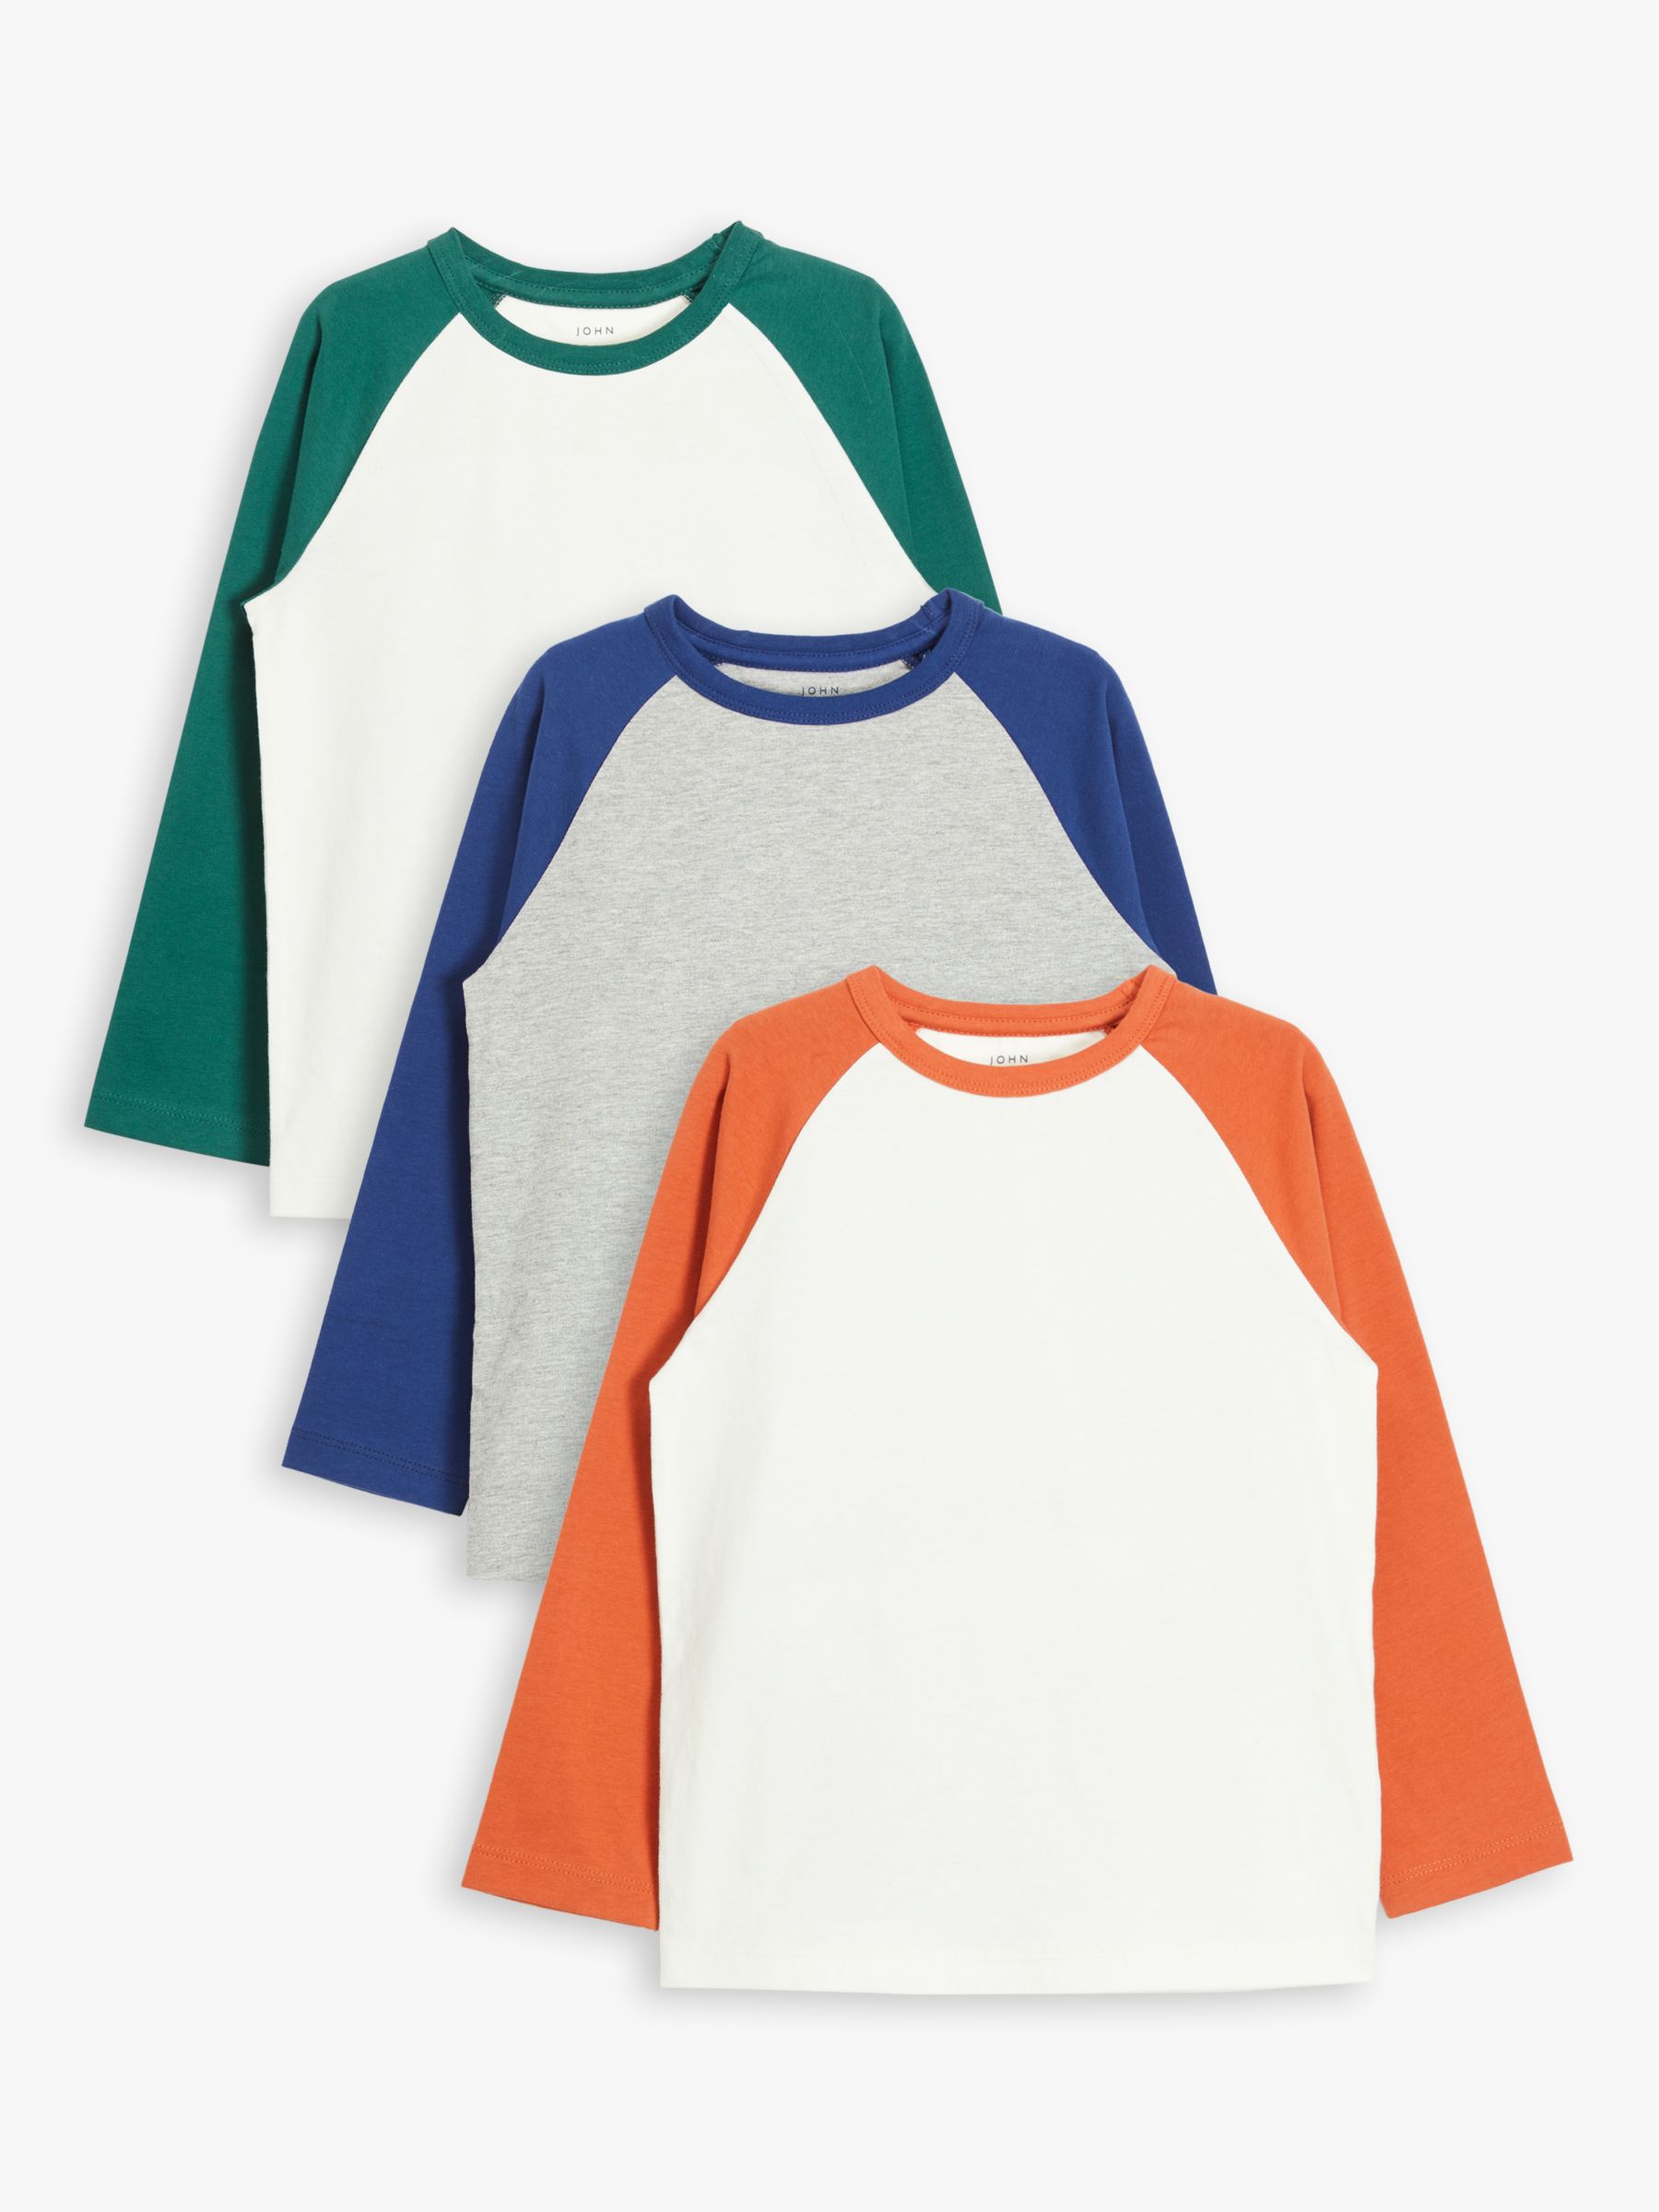 Image of John Lewis and Partners Boys Raglan Sleeve Cotton Tops Pack of 3 Multi